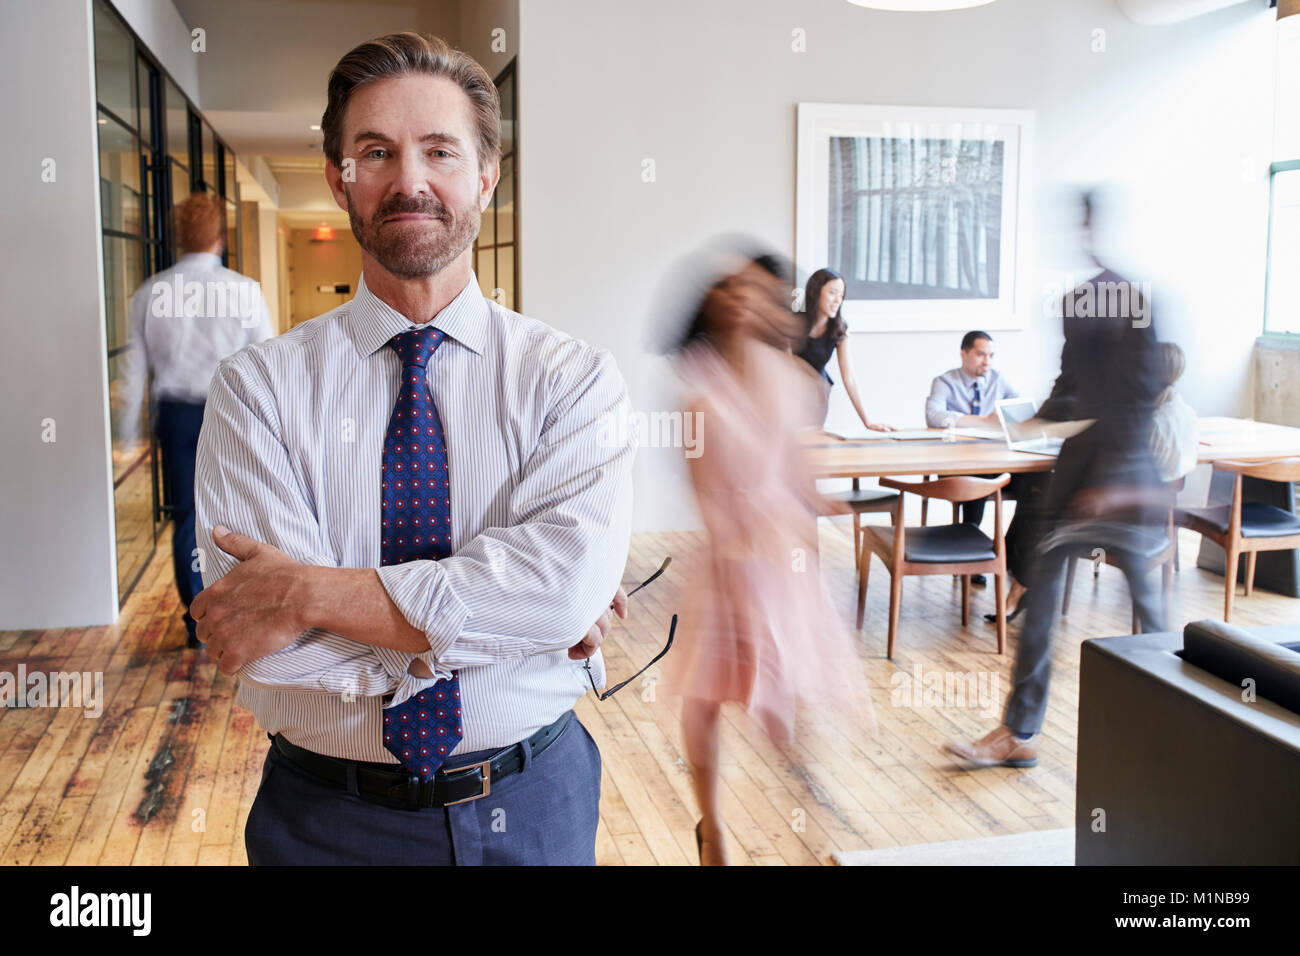 Portrait of middle aged white man in a busy modern workplace Stock Photo